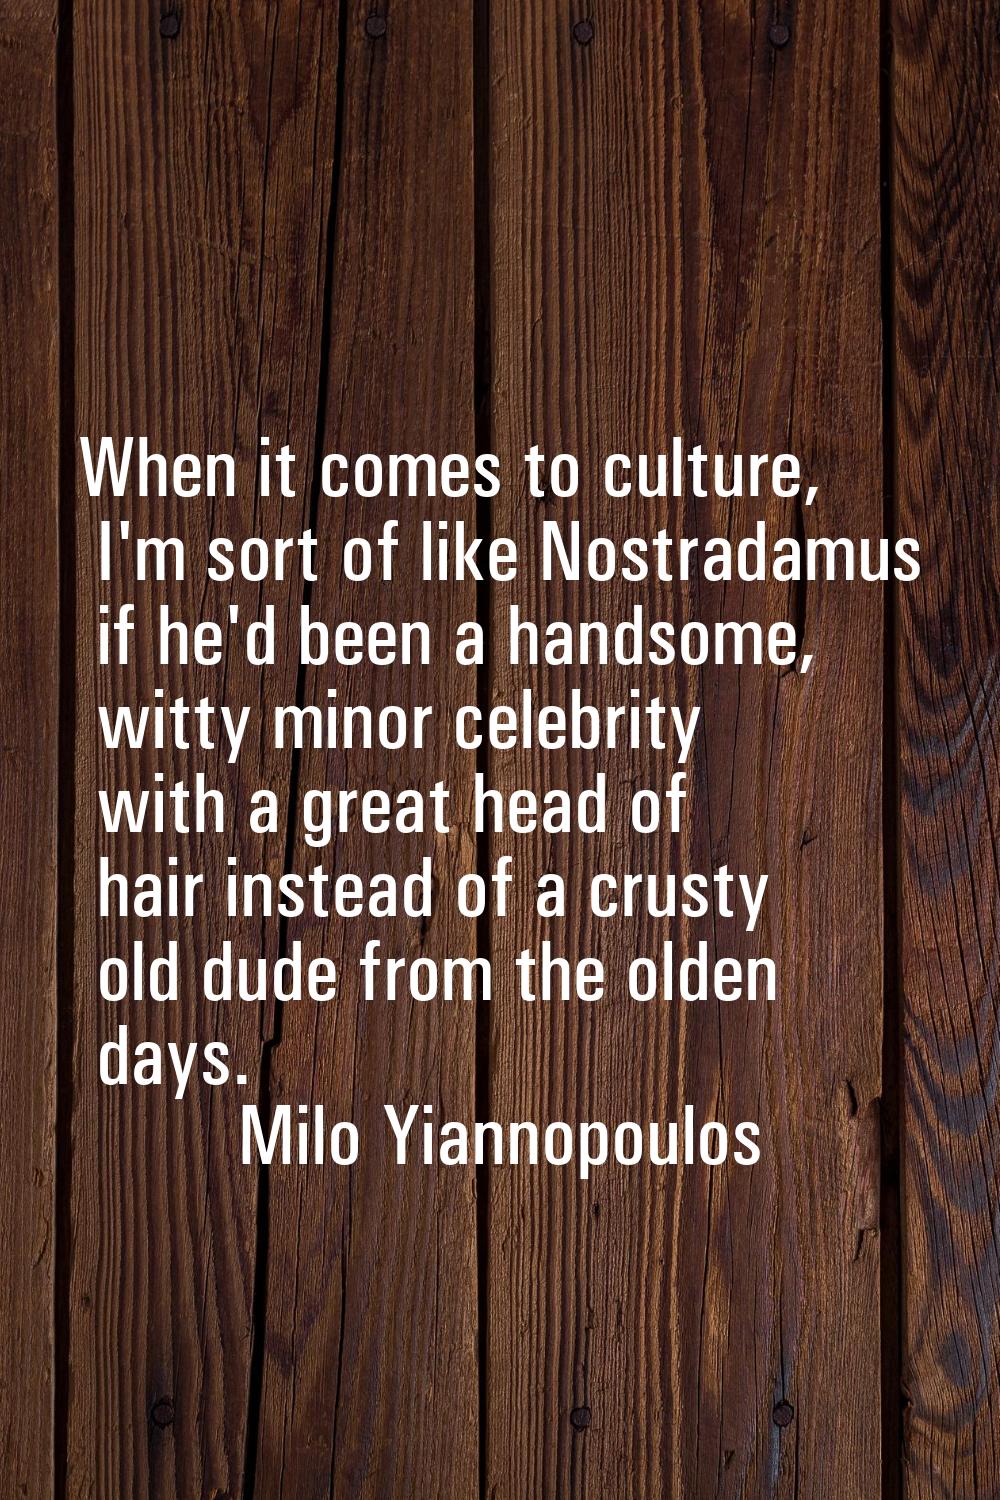 When it comes to culture, I'm sort of like Nostradamus if he'd been a handsome, witty minor celebri